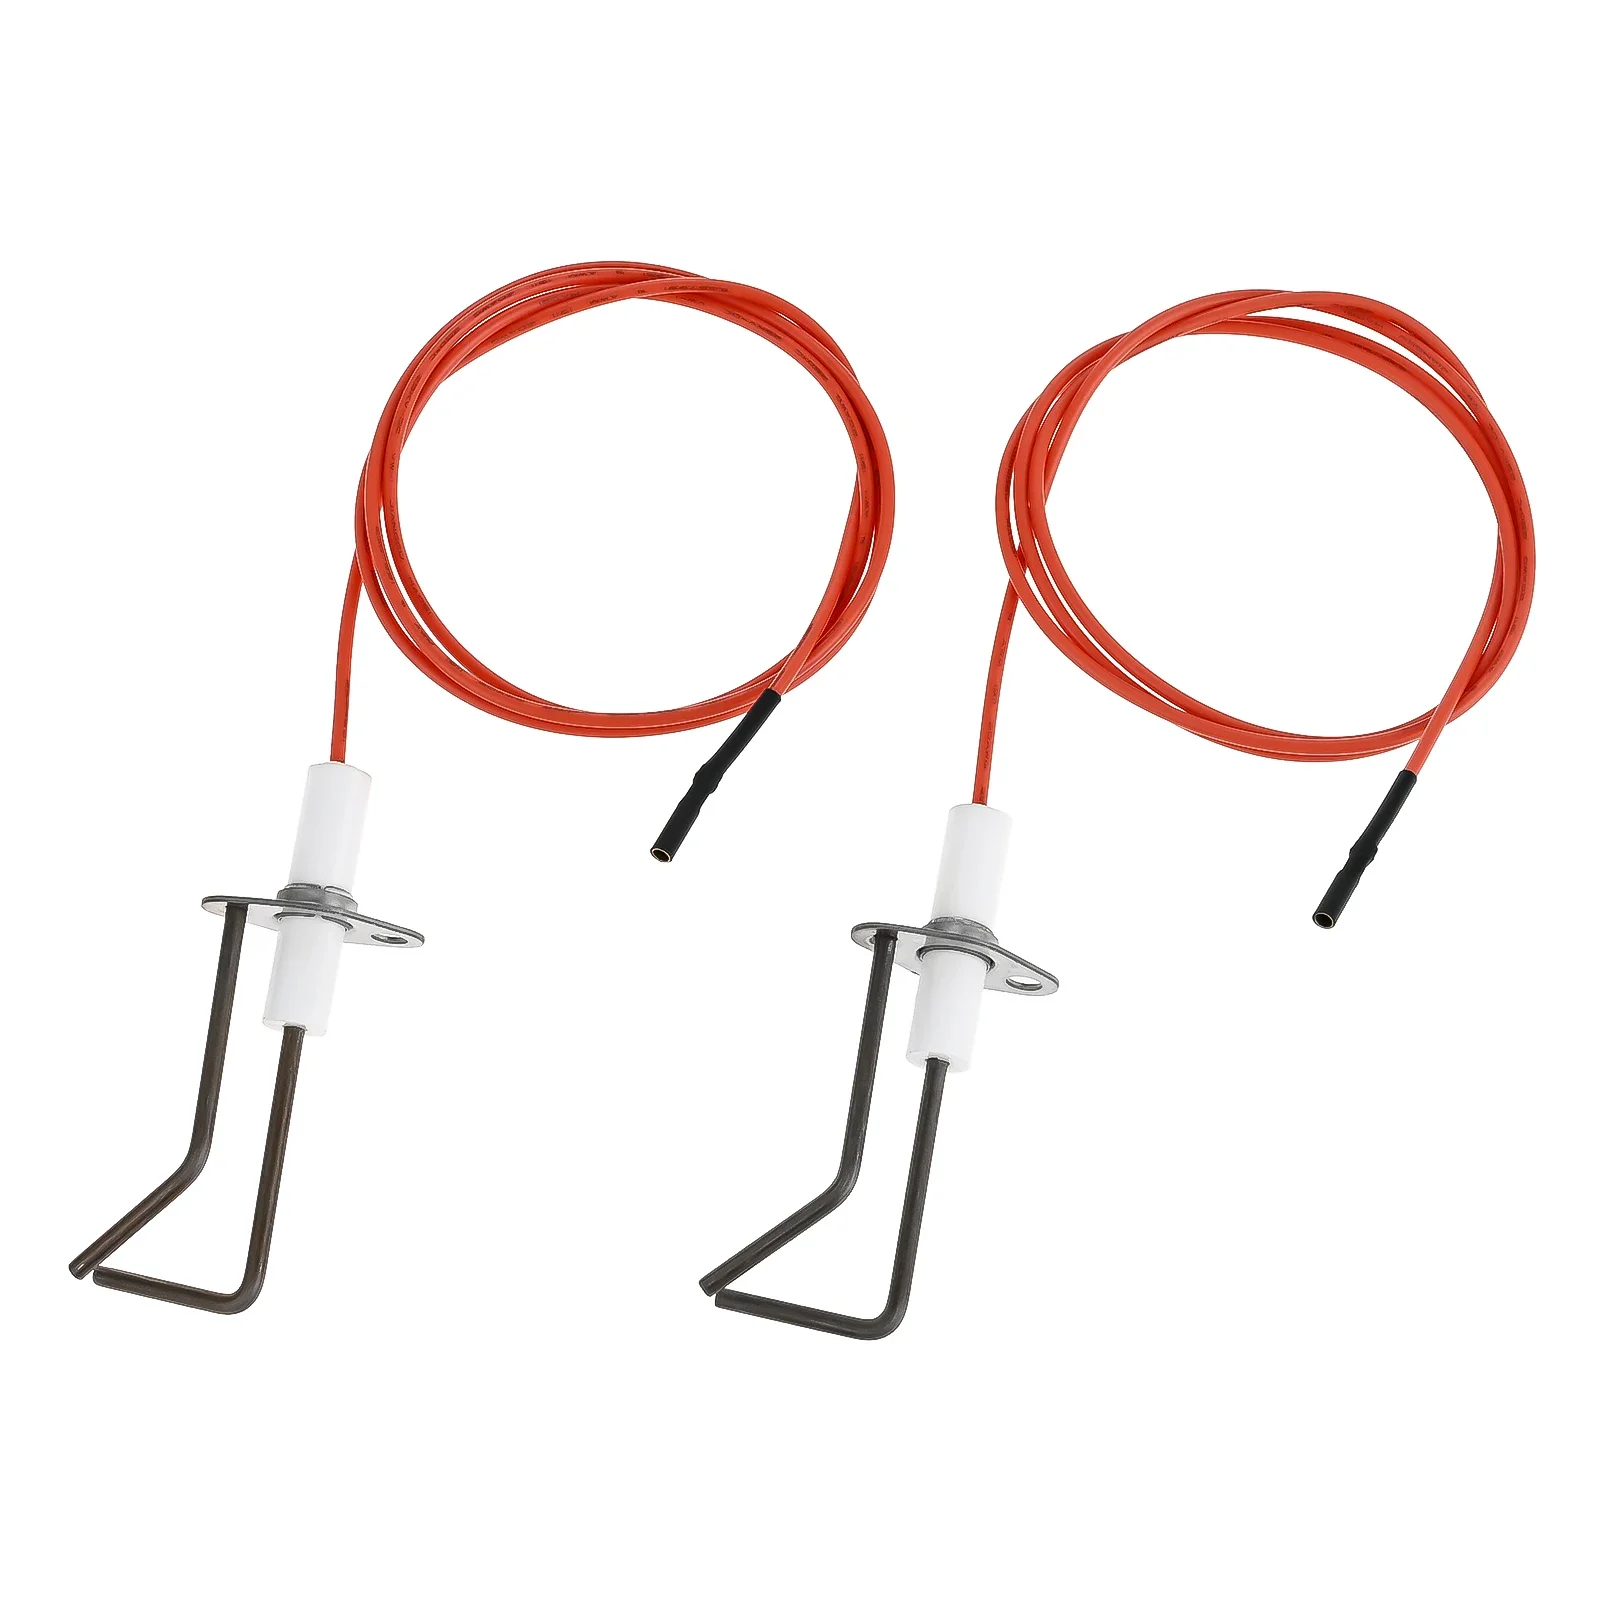 

2pcs Replacement 62-24164-01 Spark Ignitor Fit for Rheem Furnaces Flame Sensor Igniter Sensing Rod 35 inch(900mm)